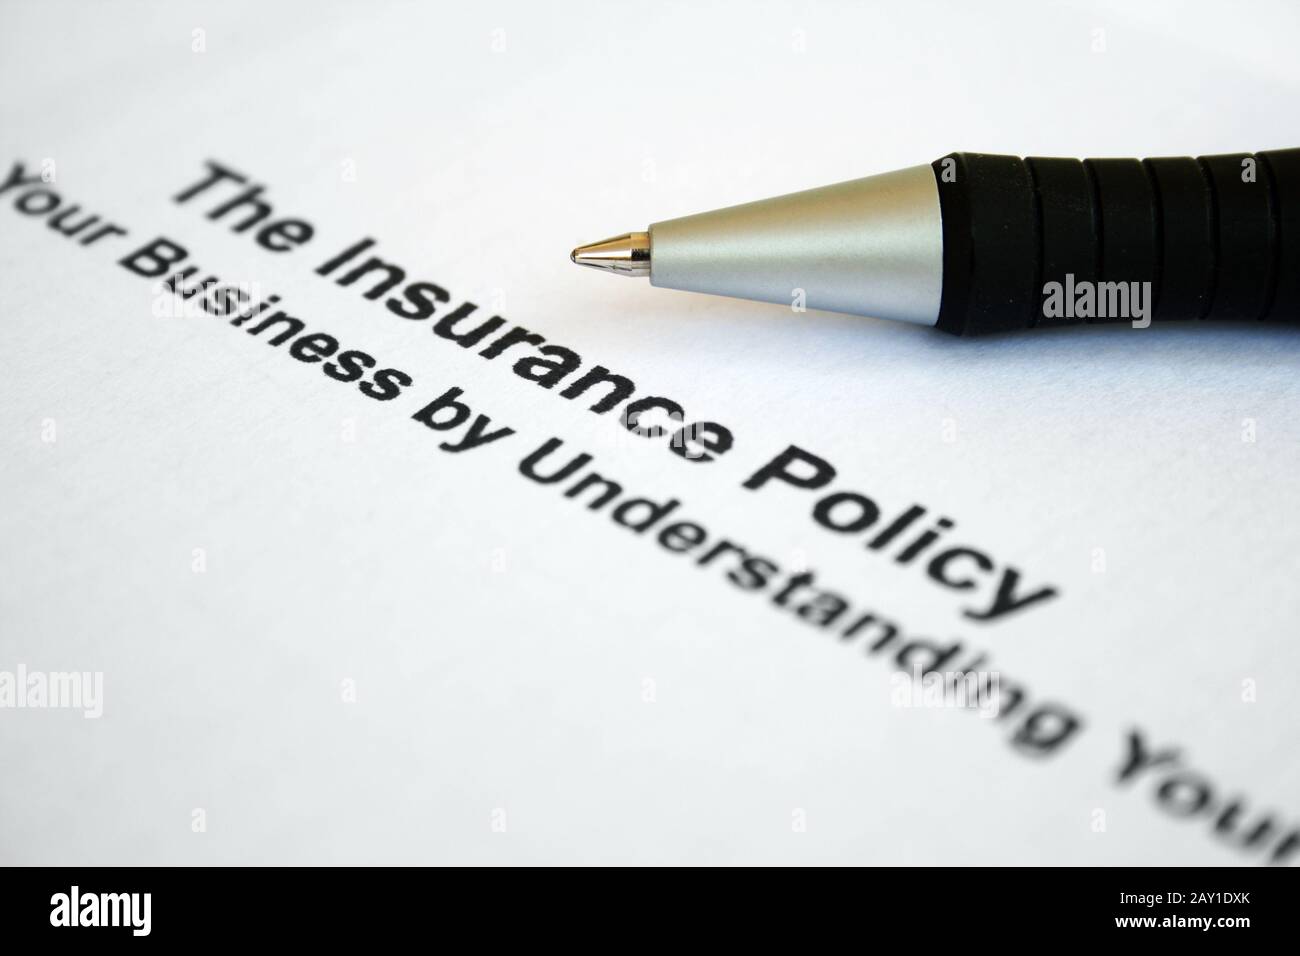 Insurance policy Stock Photo